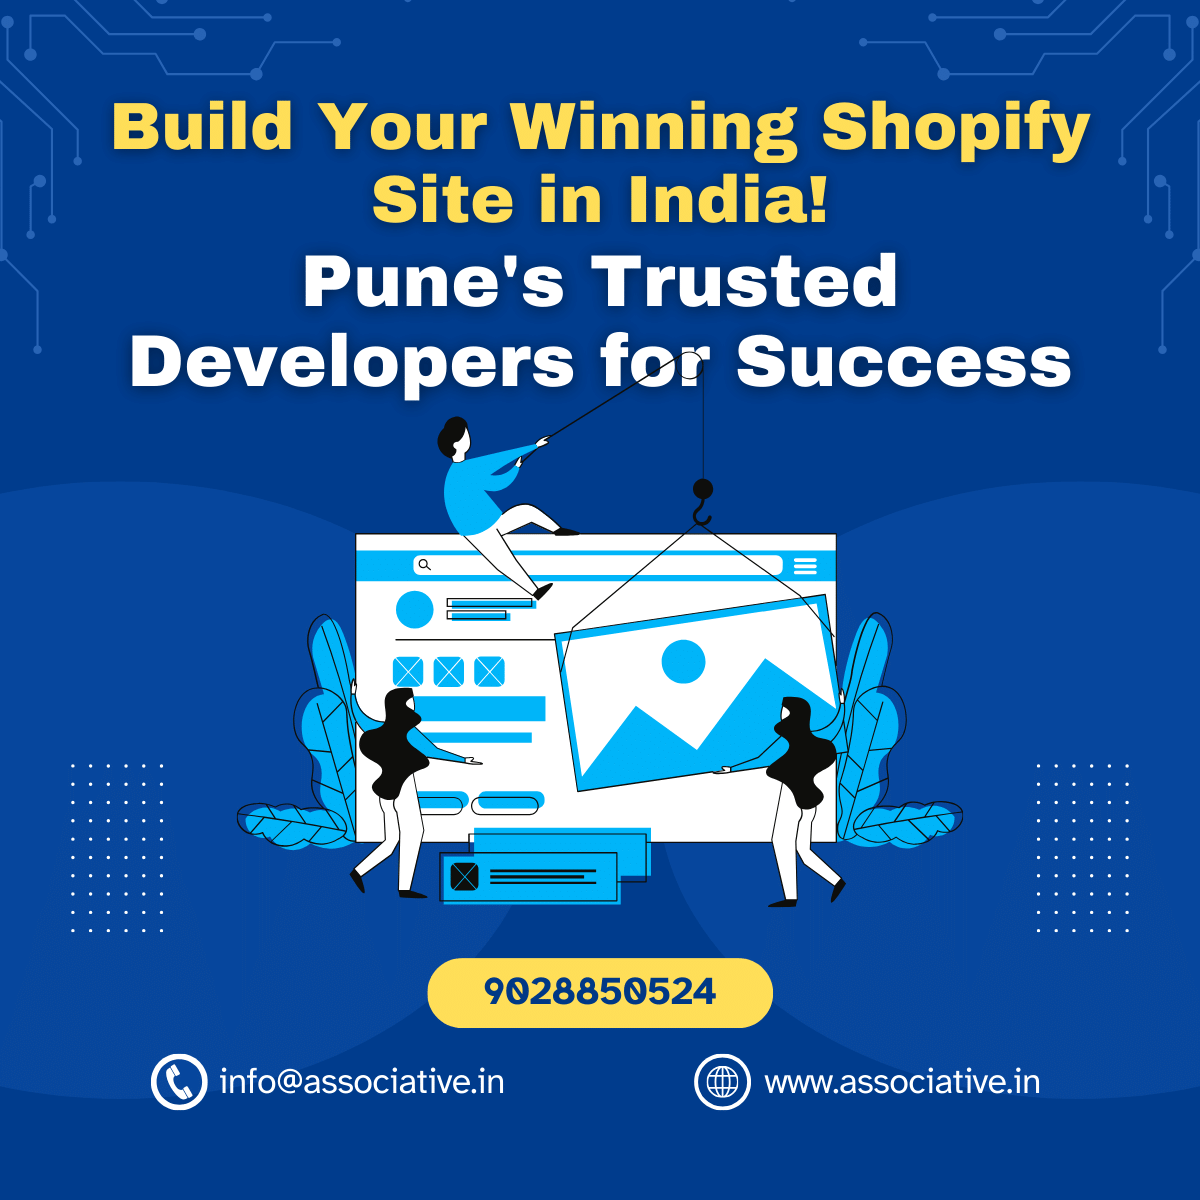 Build Your Winning Shopify Site in India! Pune's Trusted Developers for Success